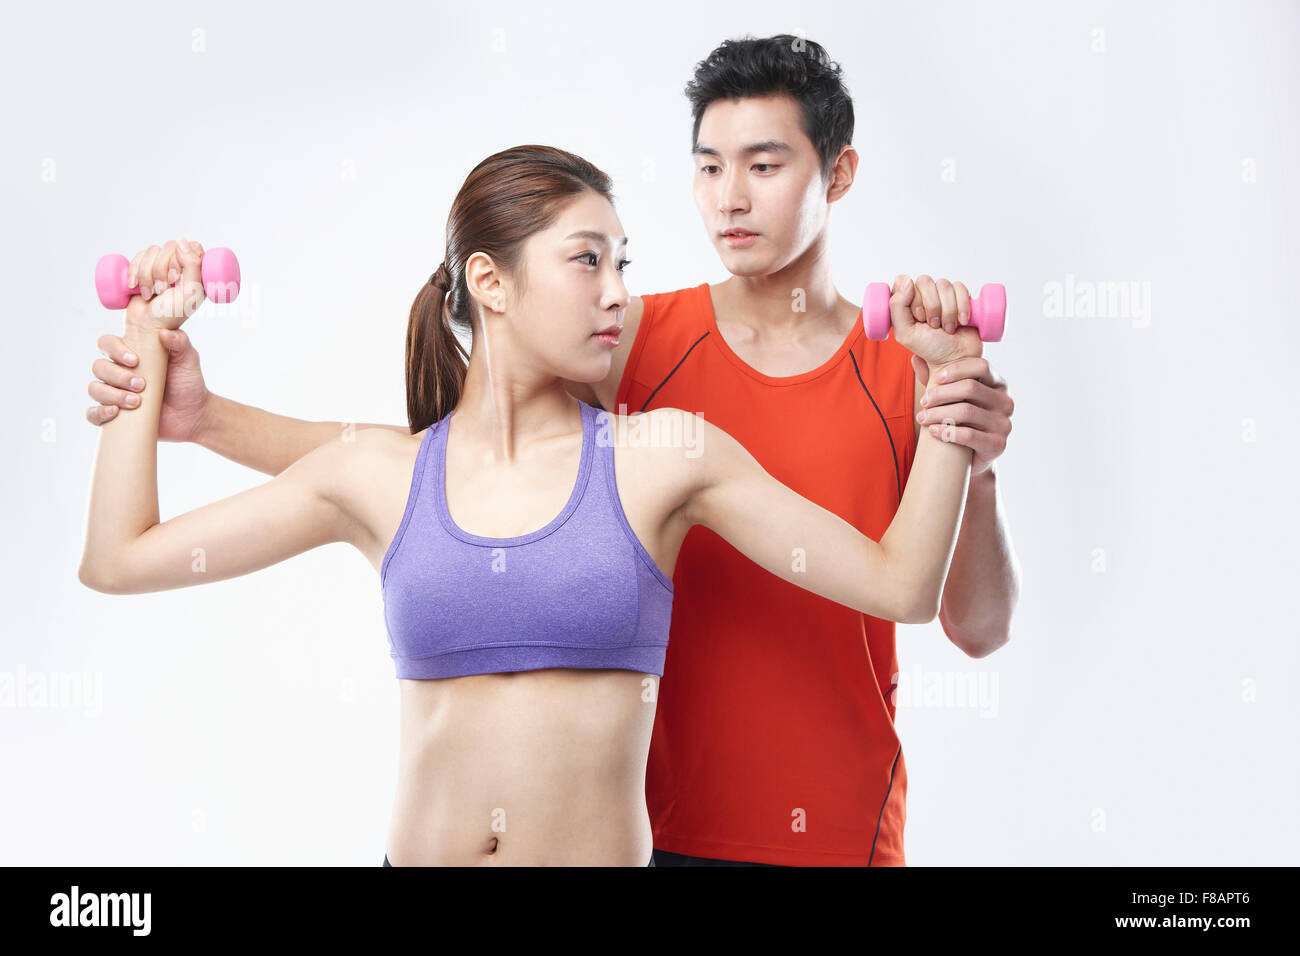 Portrait of woman lifting dumbbells and opening arms with a male health trainer helping her Stock Photo